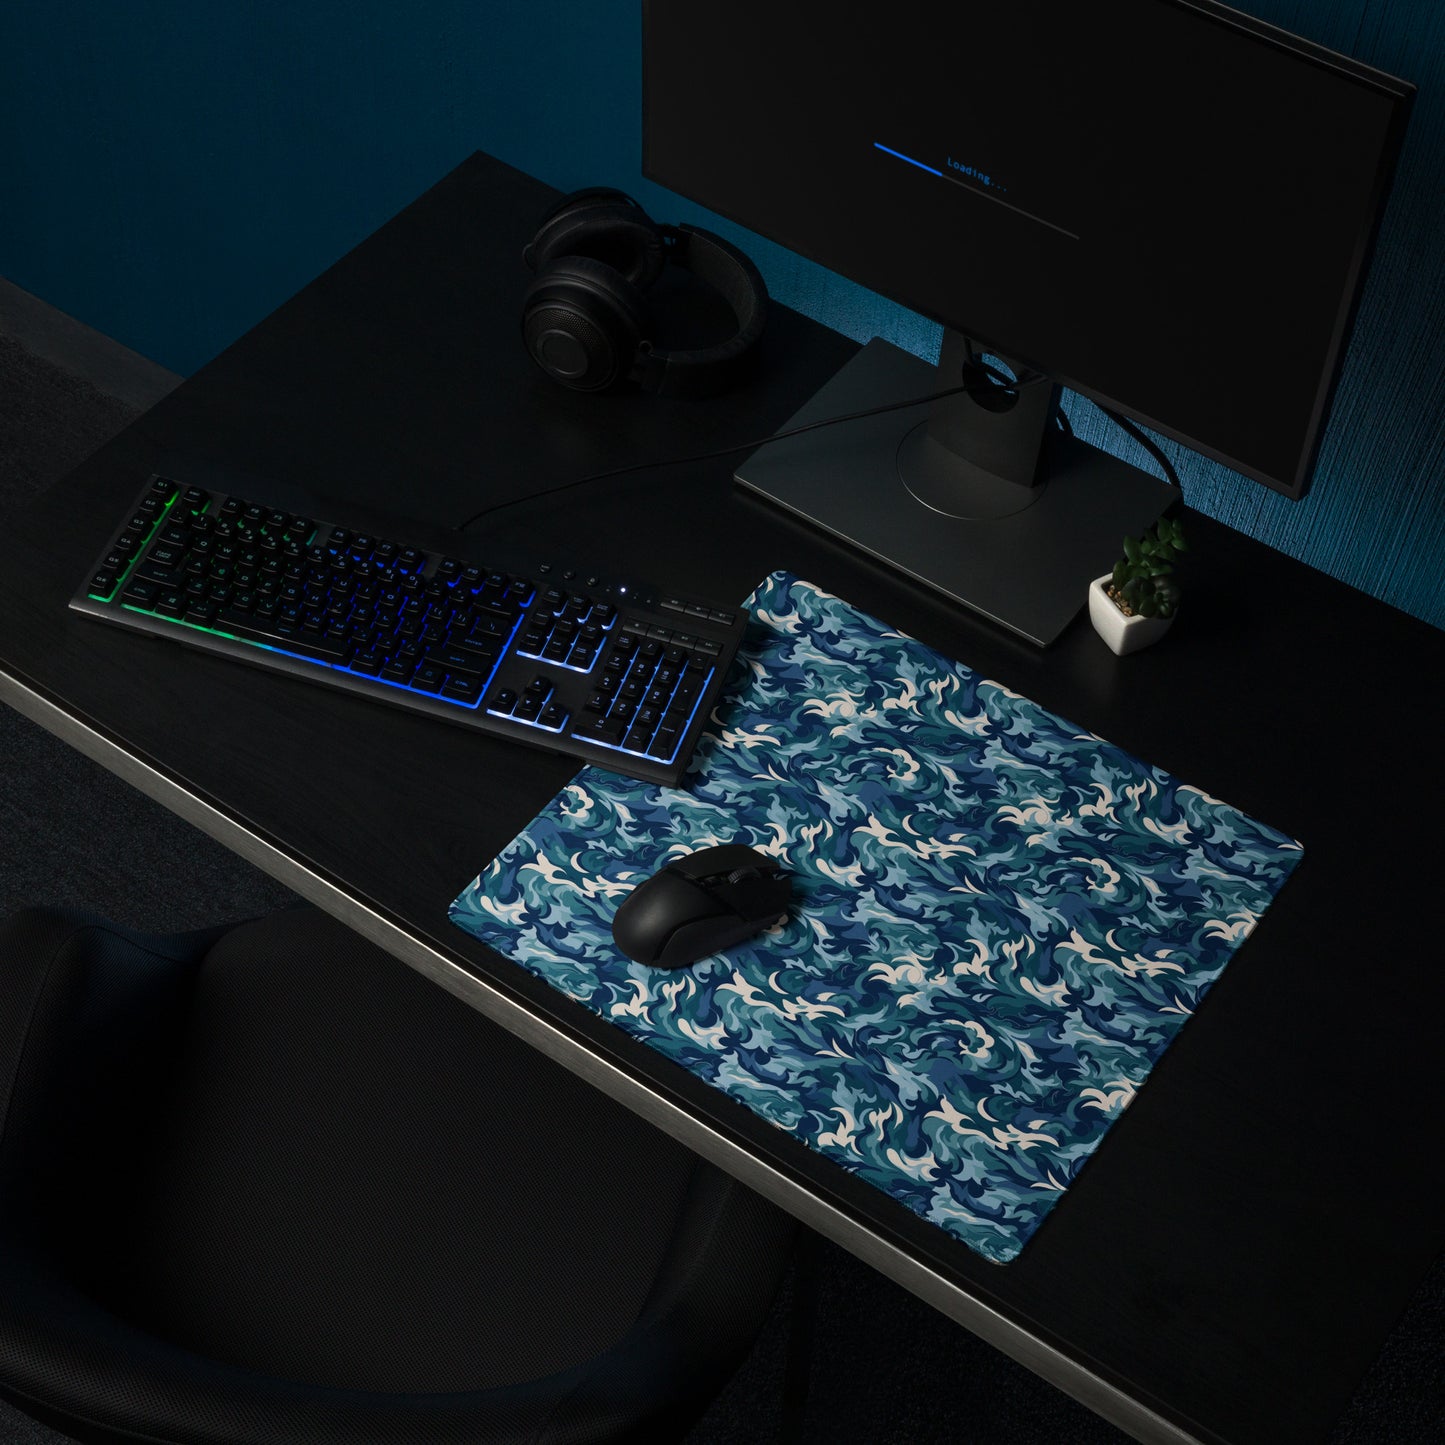 A 18" x 16" desk pad with a teal and white camo pattern sitting on a desk.